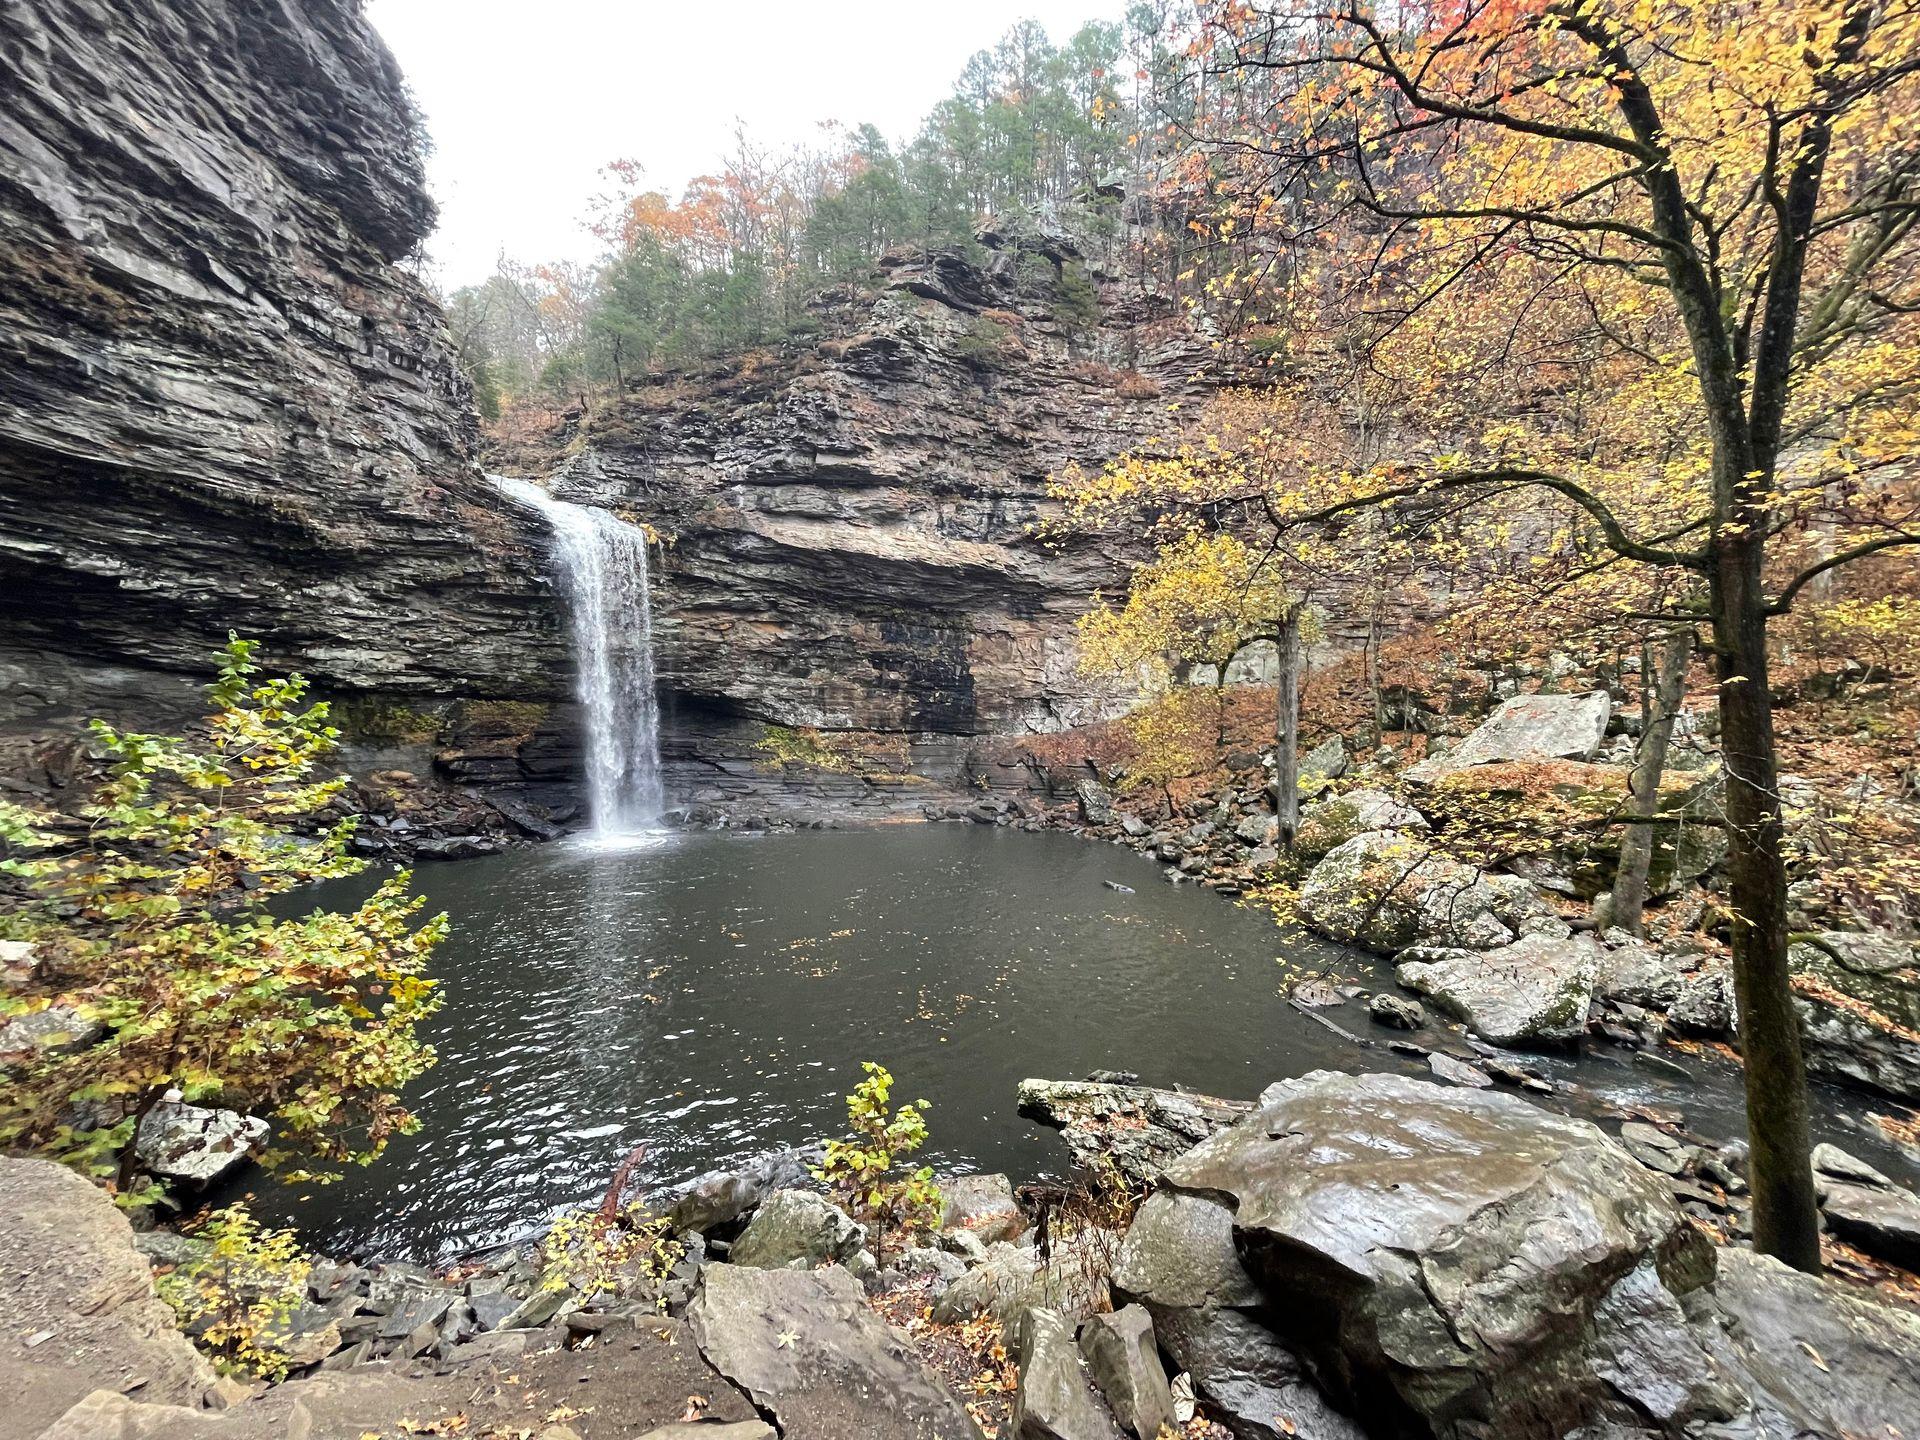 A view of Cedar Falls from across the water. The small pool of water is surrounded by rocks and there are some trees that are bright yellow with fall foliage.